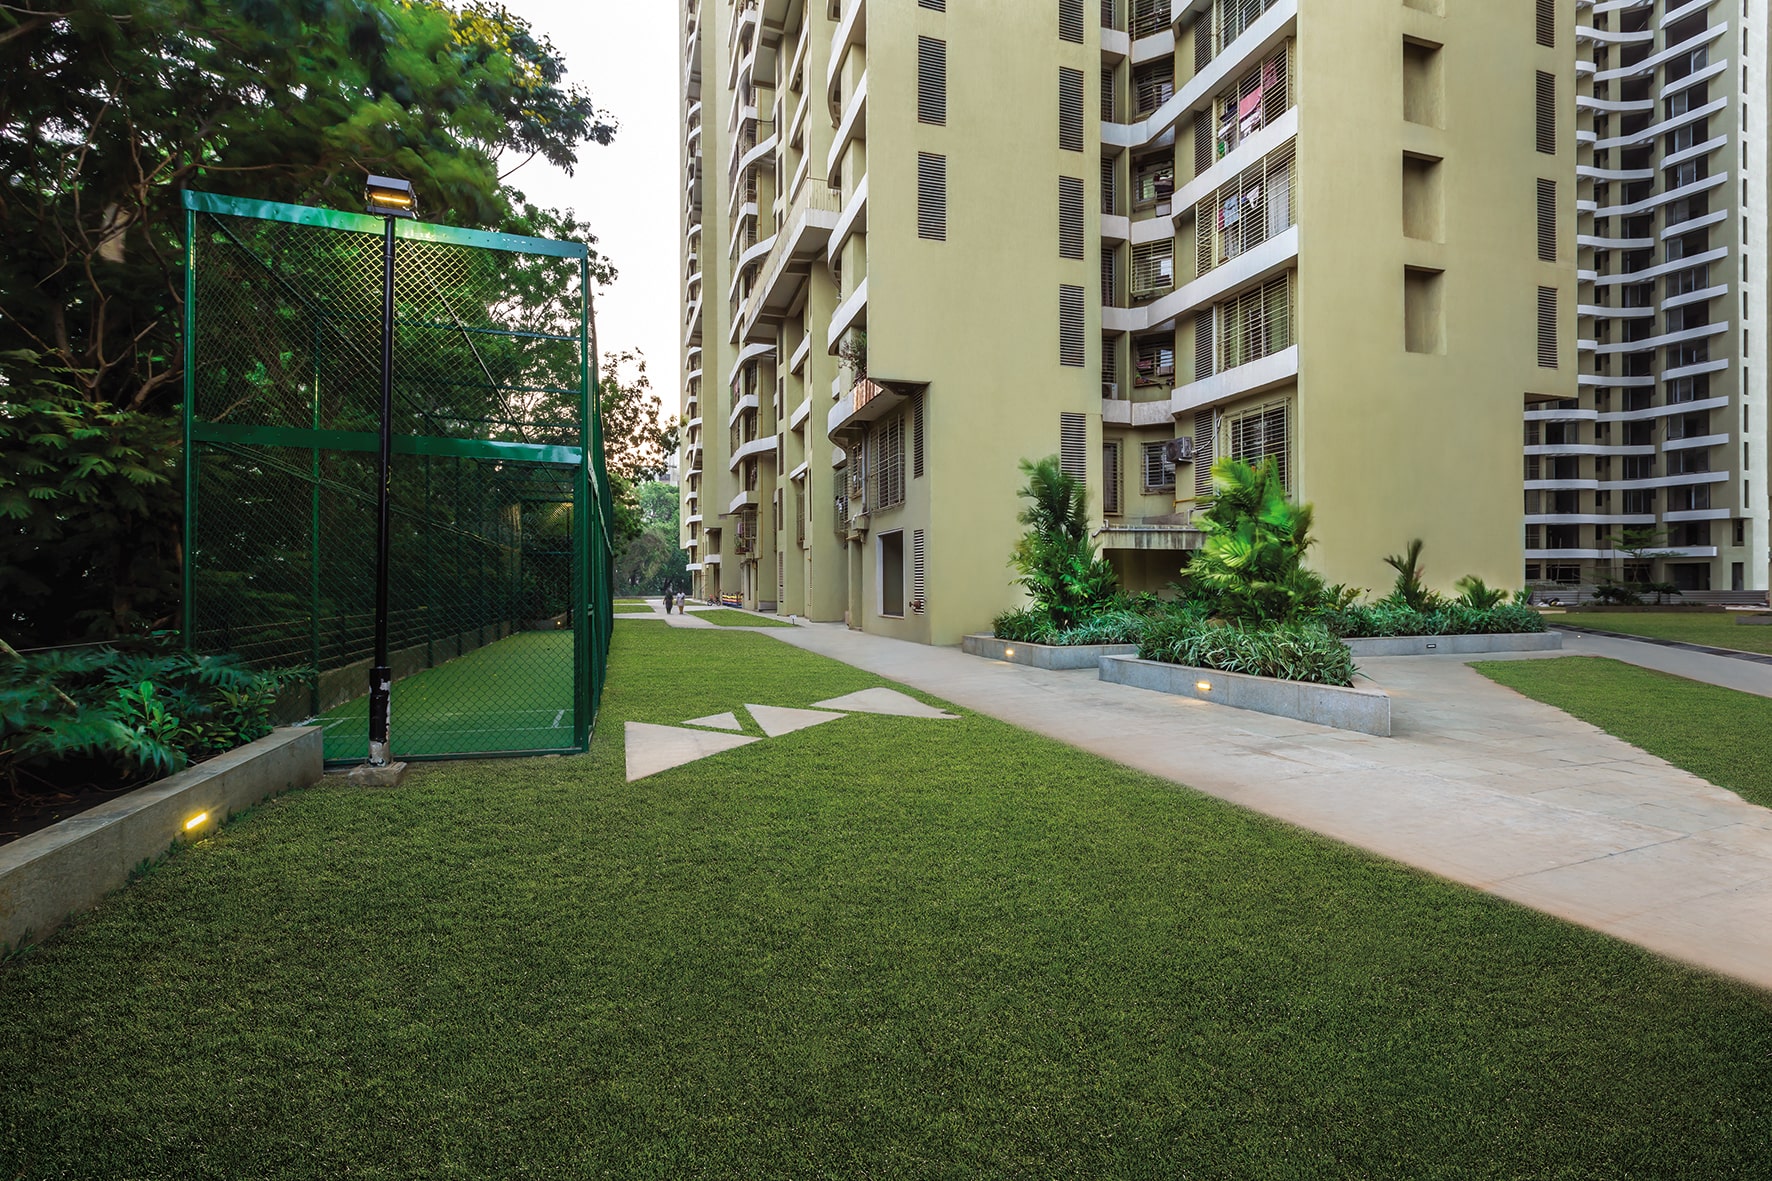 New projects in Thane